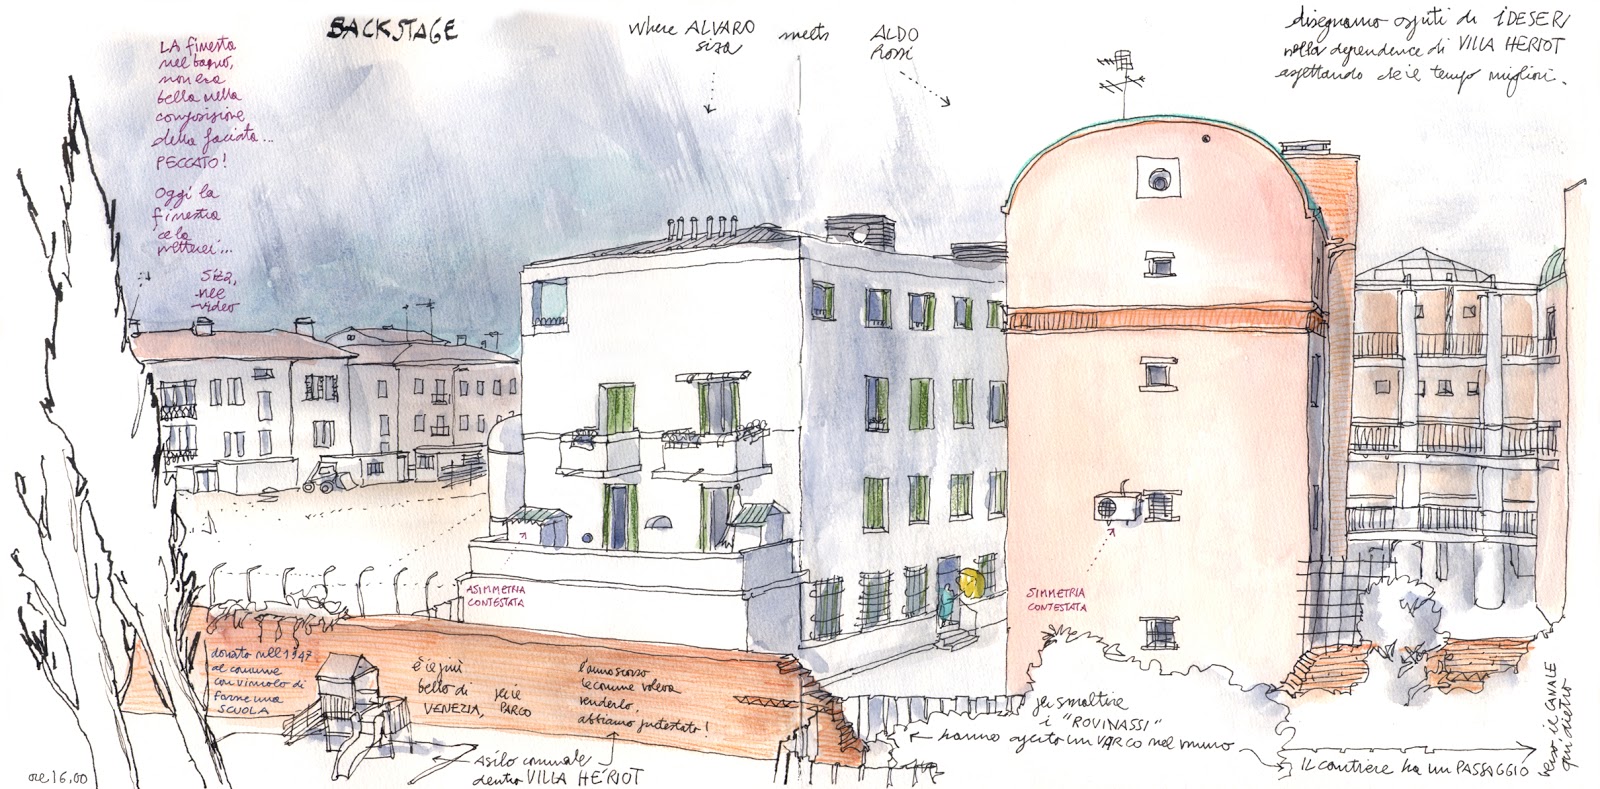 Reporting from Giudecca, the side of Venice /1 Sketchers